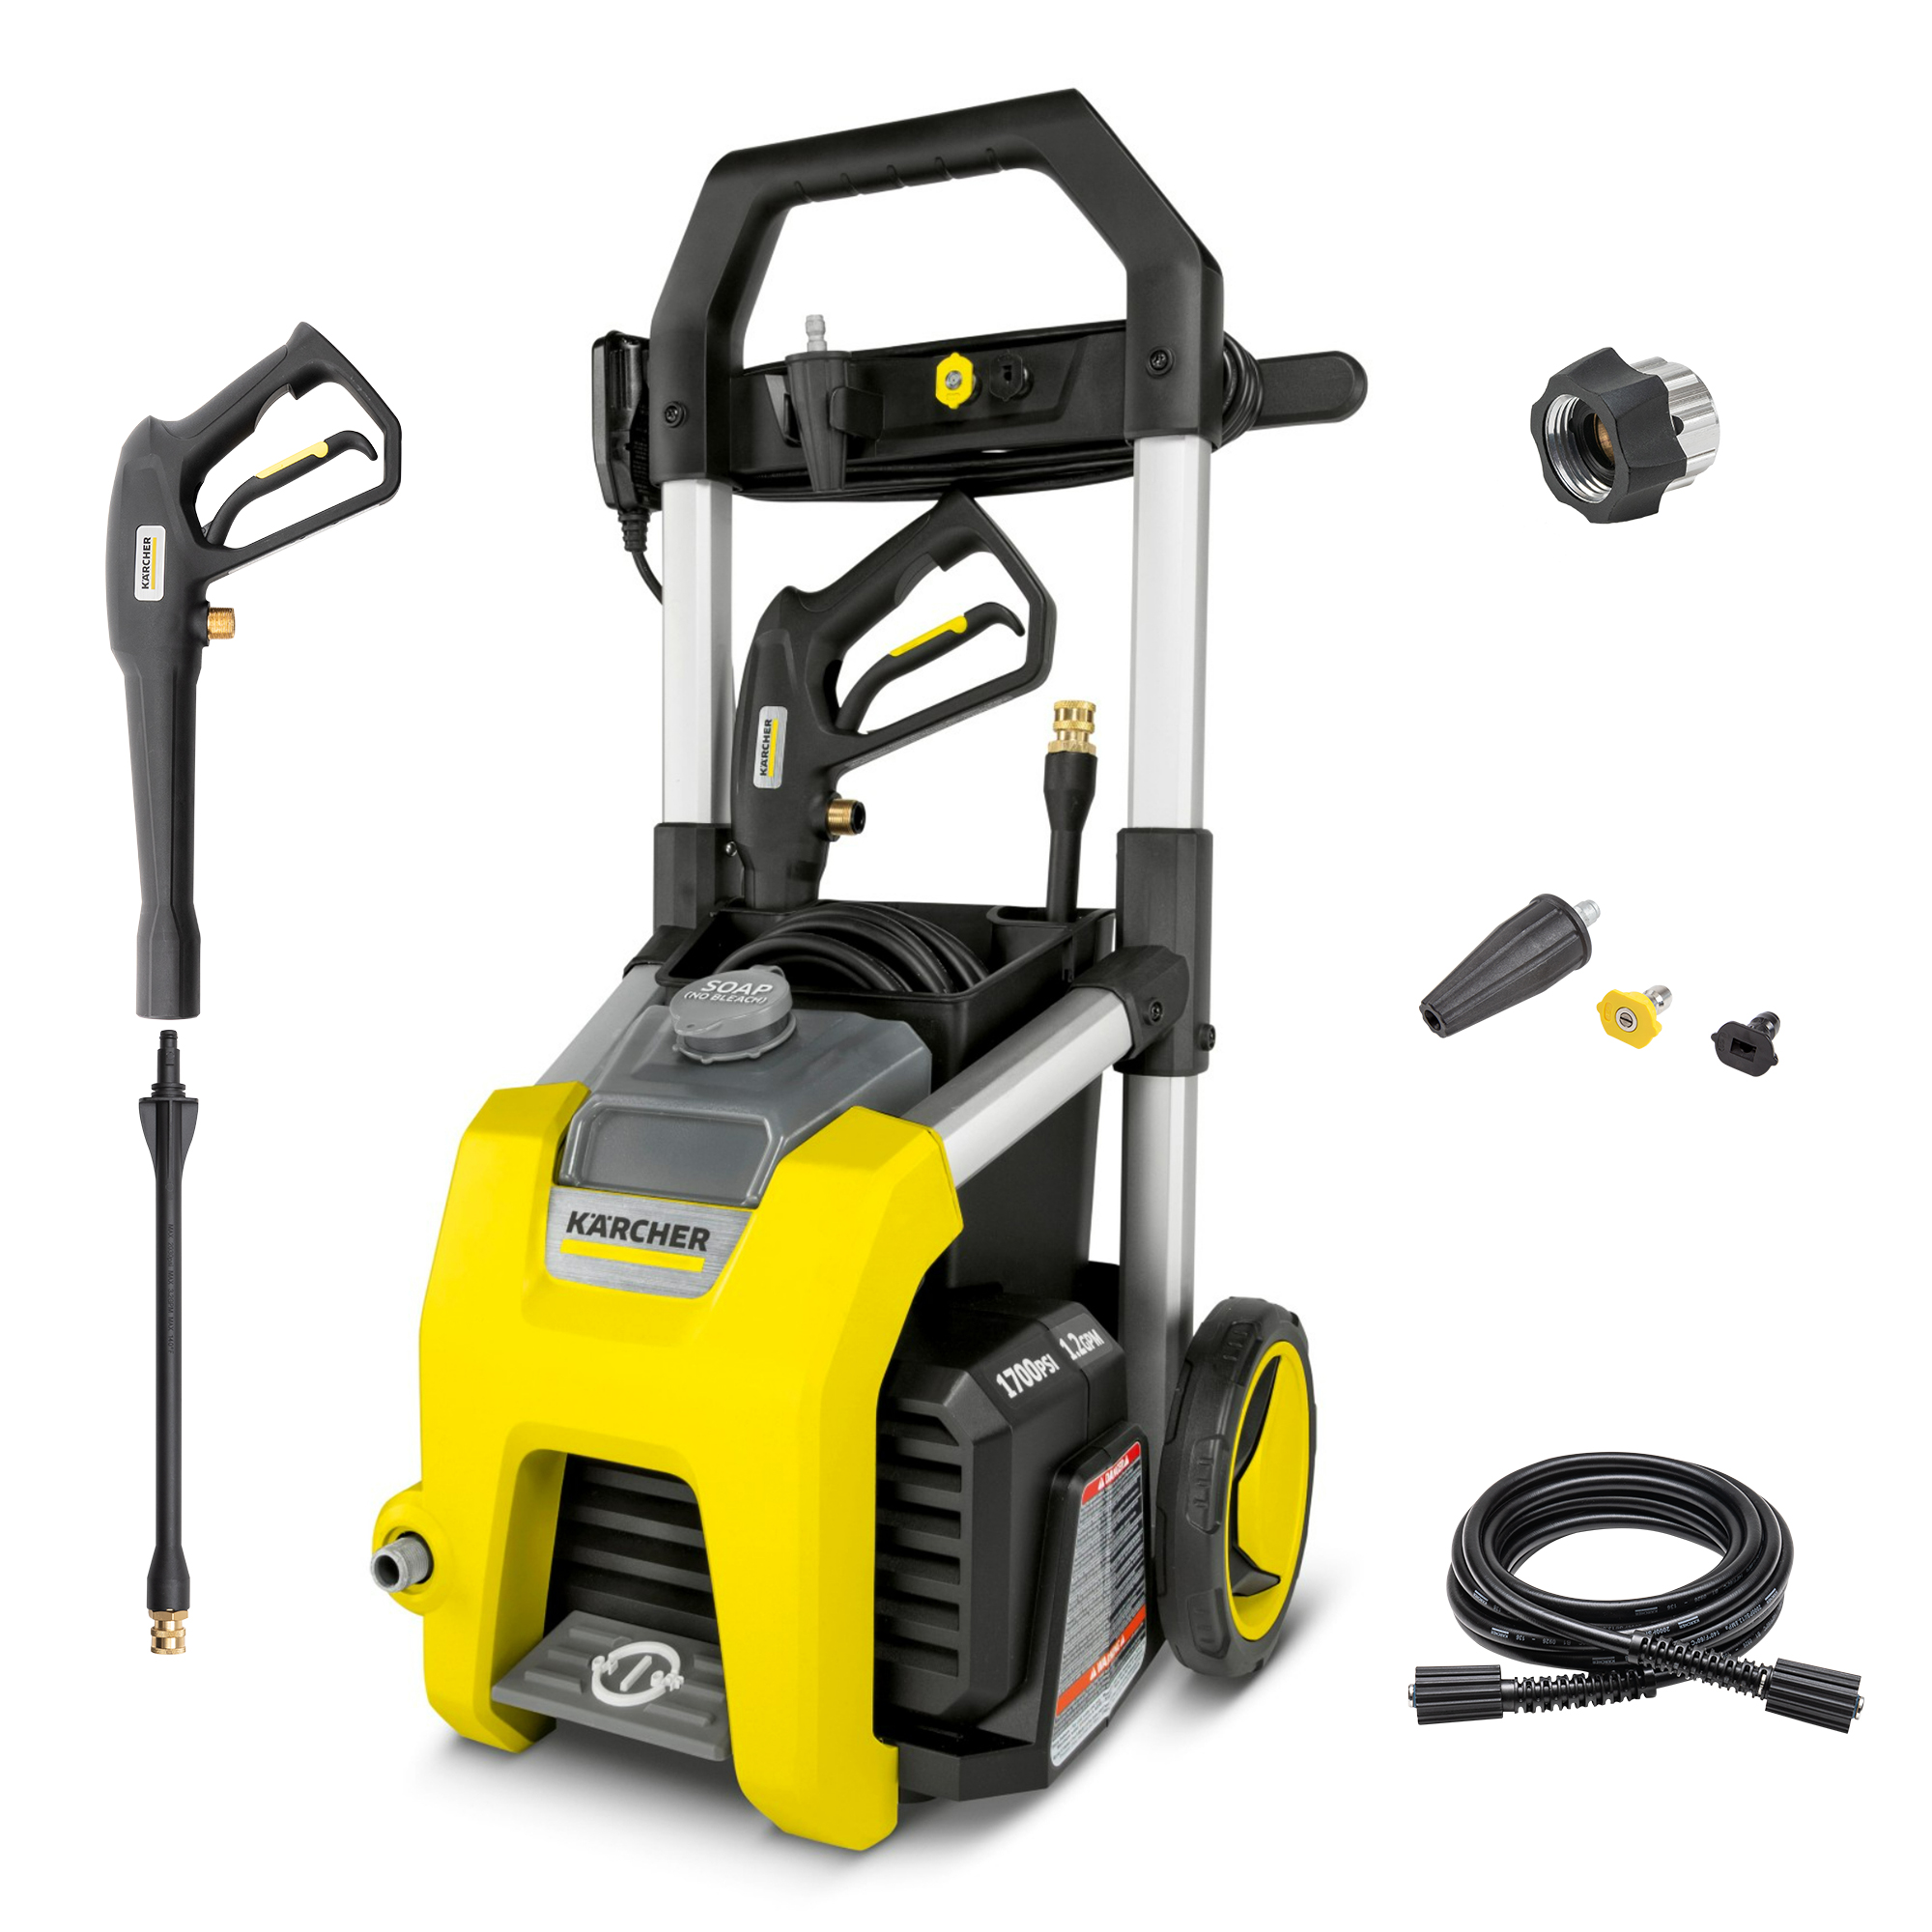 Karcher K1700, Max 2125 PSI Pressure Washer with Hose, Spray Gun, 3 Nozzles, 1.2 GPM, Power Washer - image 1 of 9